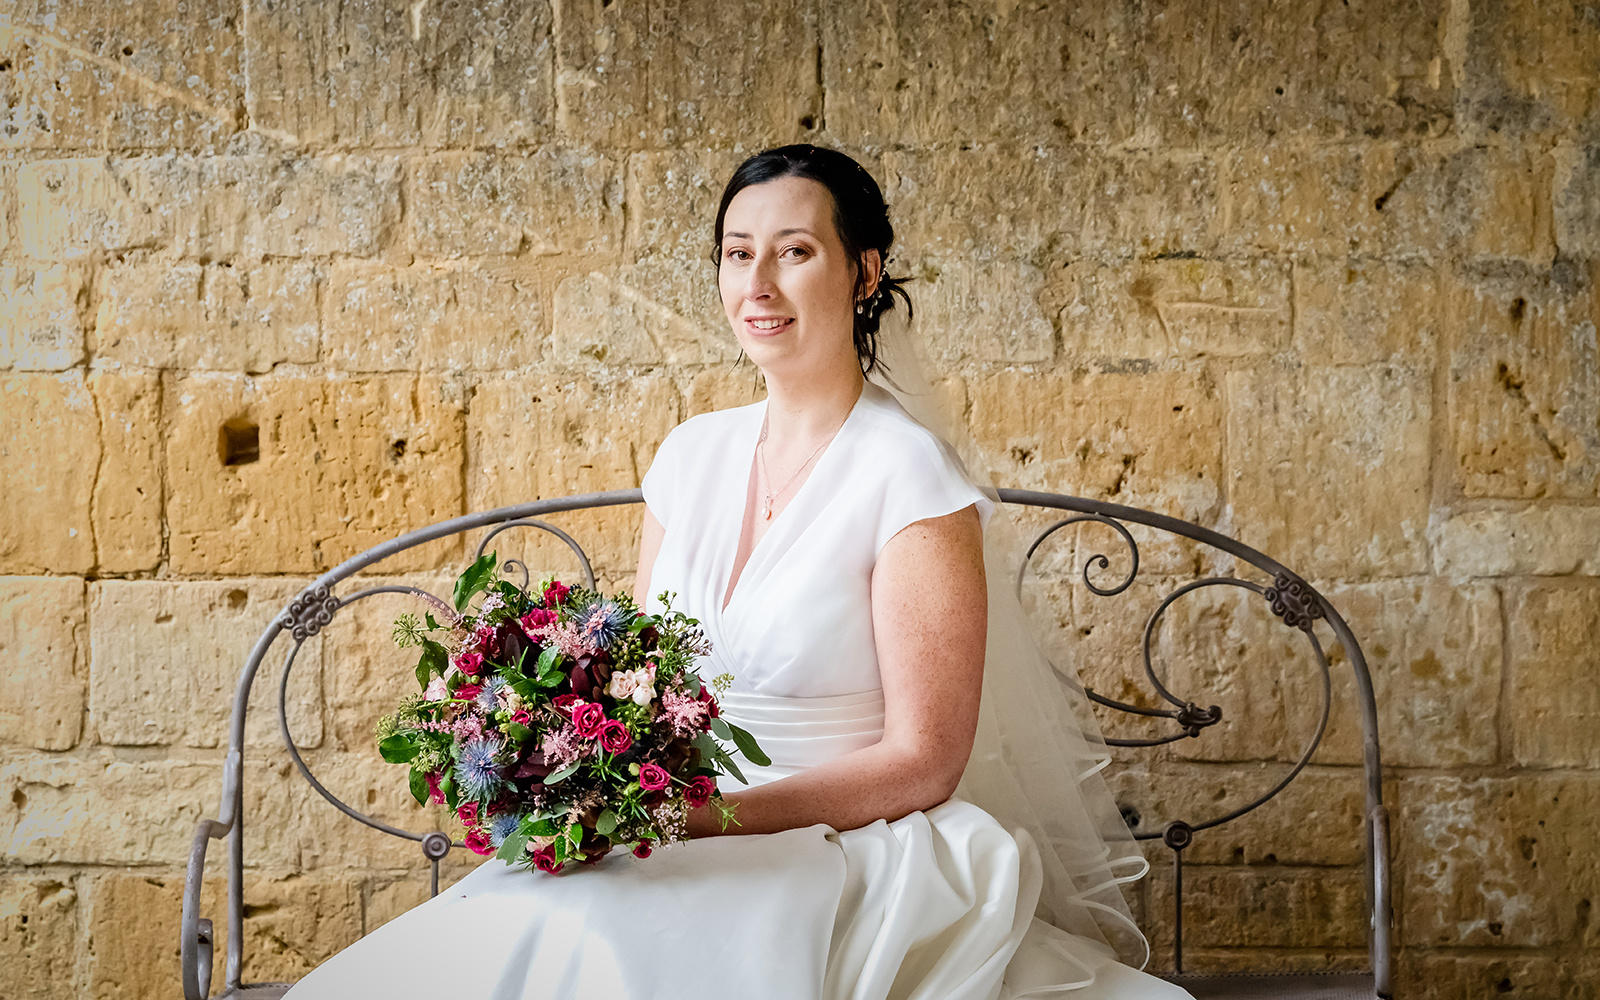 Capture Every Moment wedding photography duo from Cirencester reportage traditional photographers Lapstone Barn Chipping Campden Cotswolds venue Bride